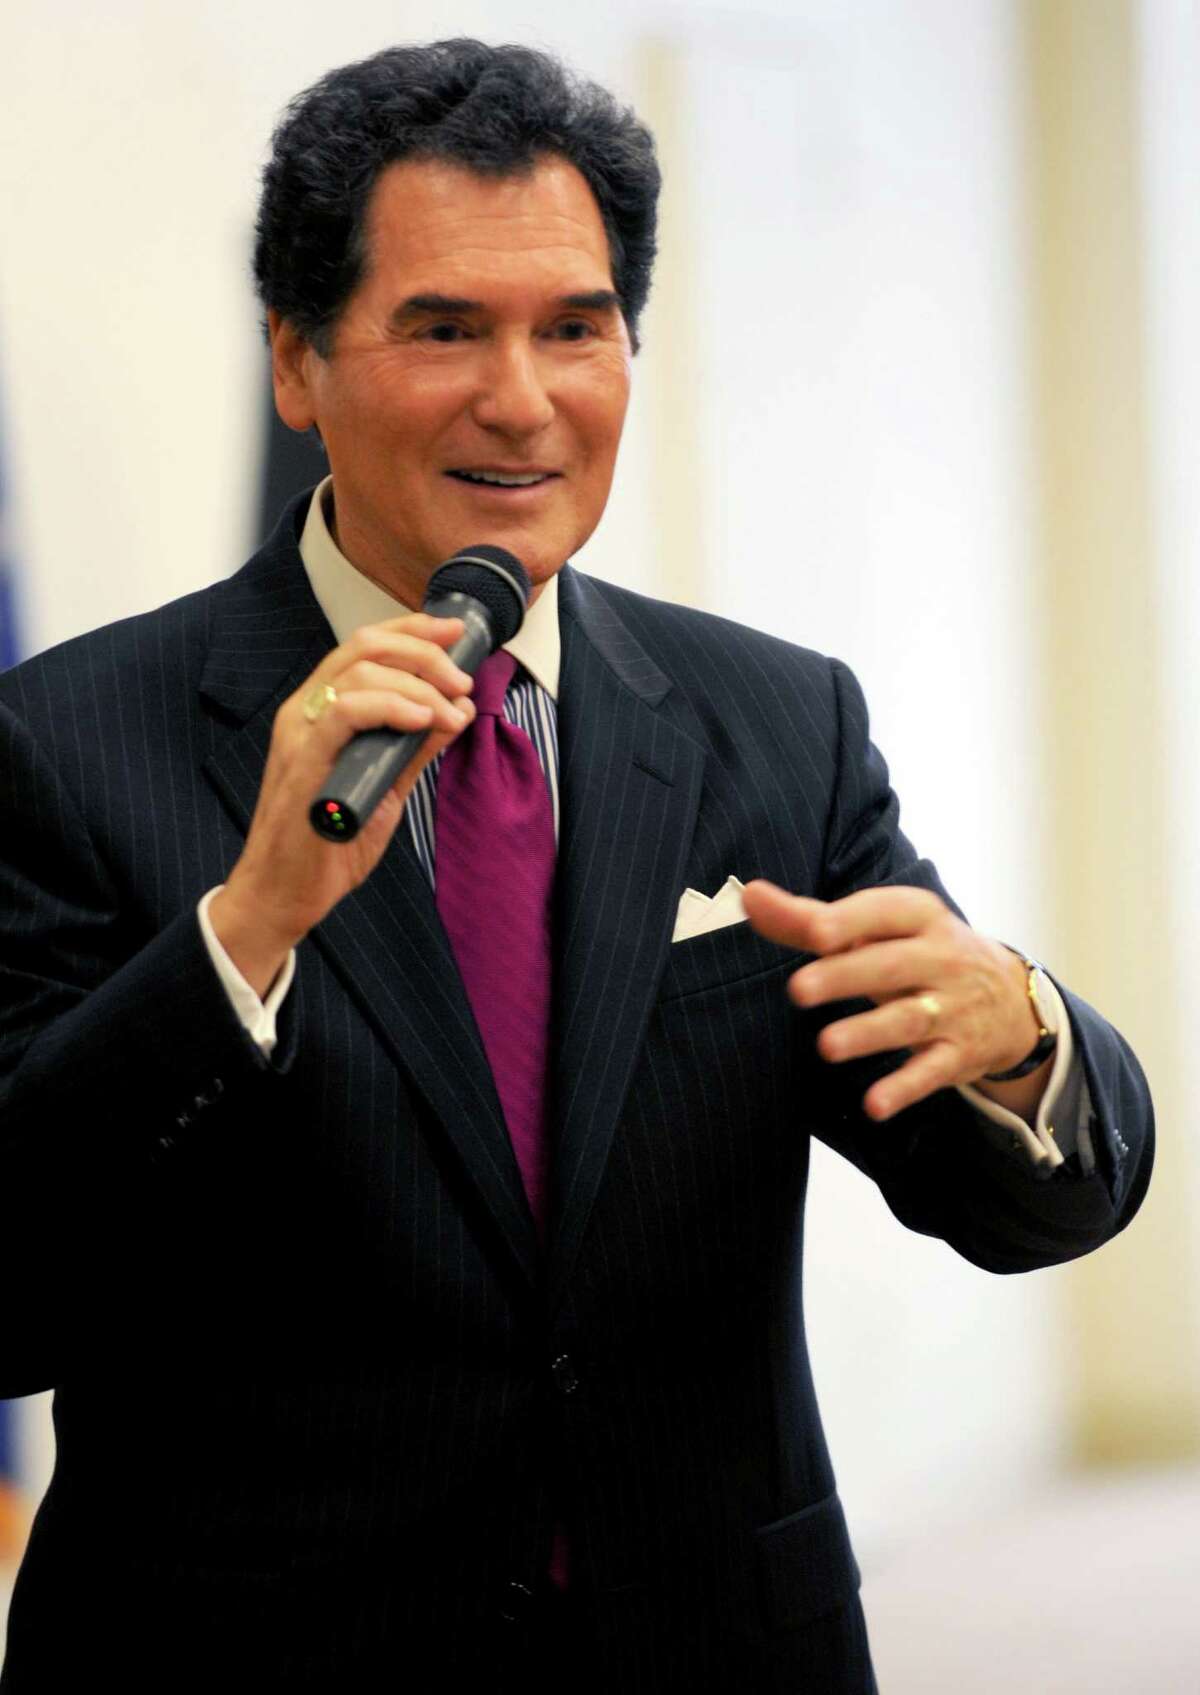 News anchor Ernie Anastos speaks during "Civility in the Media," the second installment of the mayor's civility series at the Ferguson Library in Stamford on Wednesday, October 3, 2012.